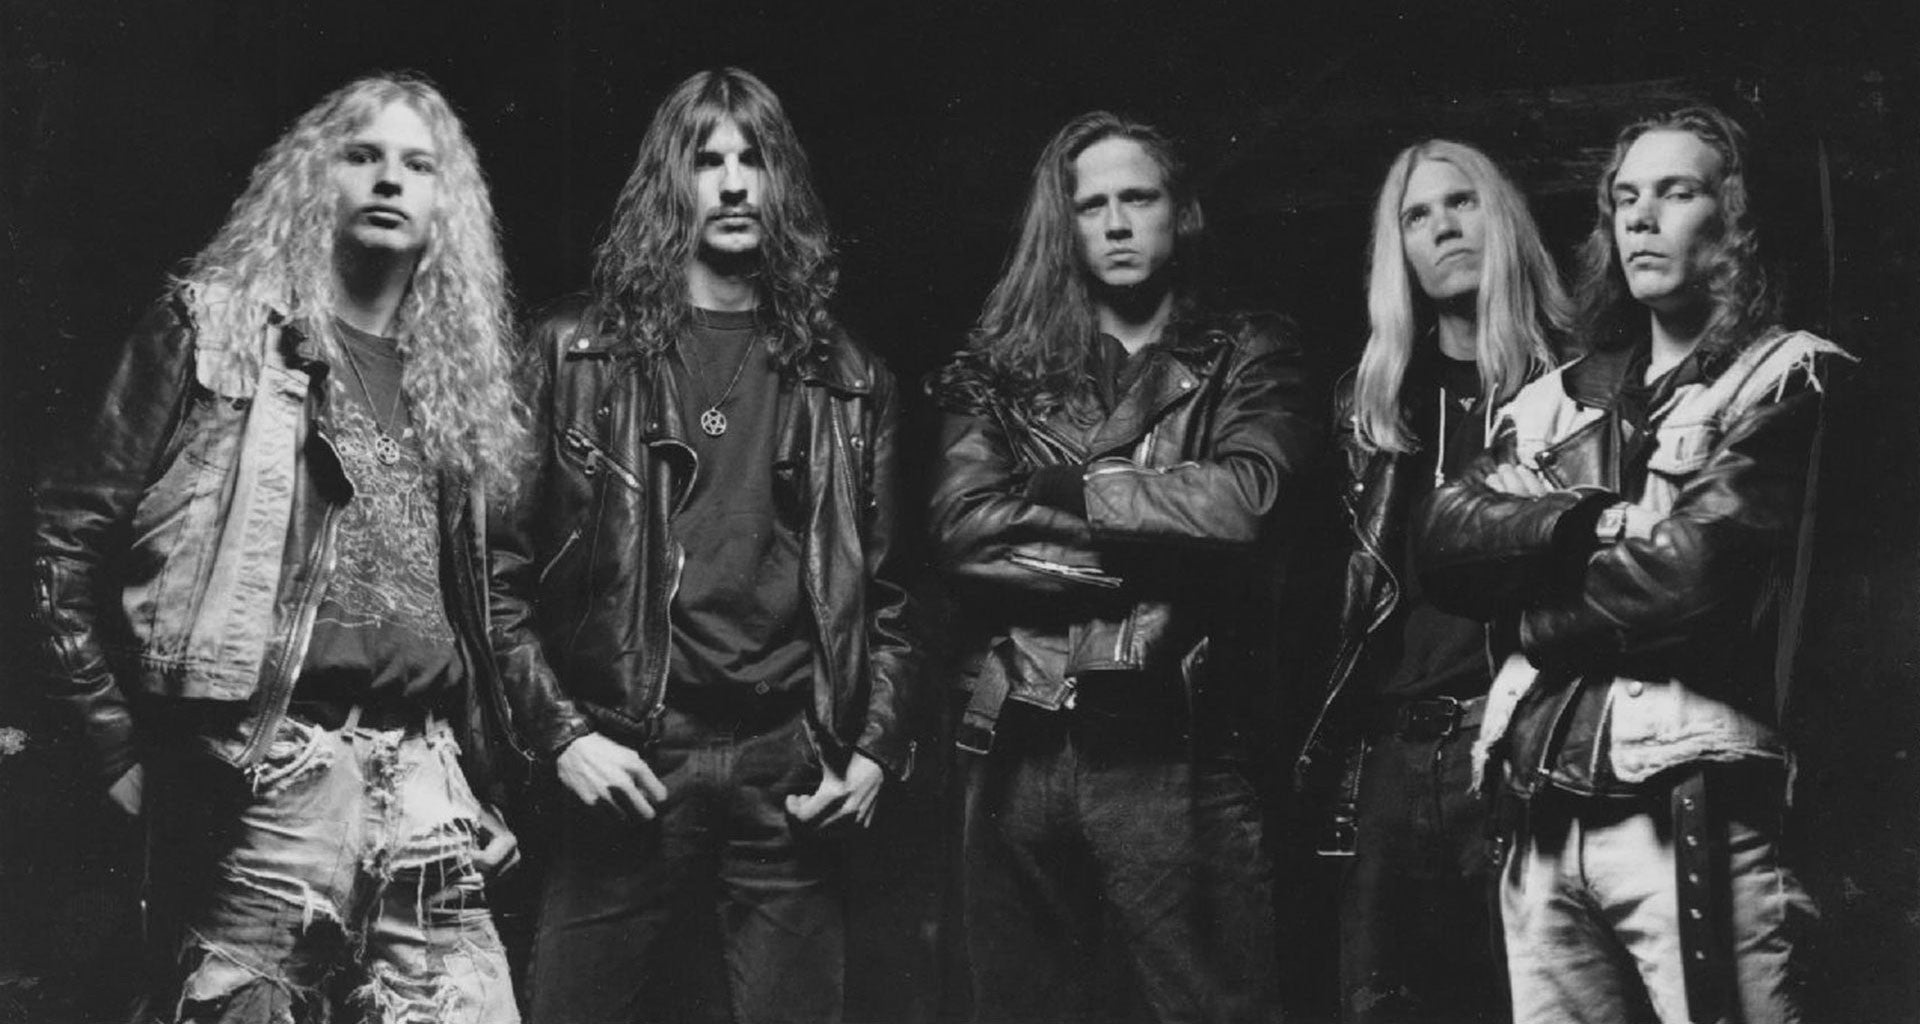 26 Years Ago: SEANCE emerge with the Levitised Spirit demo